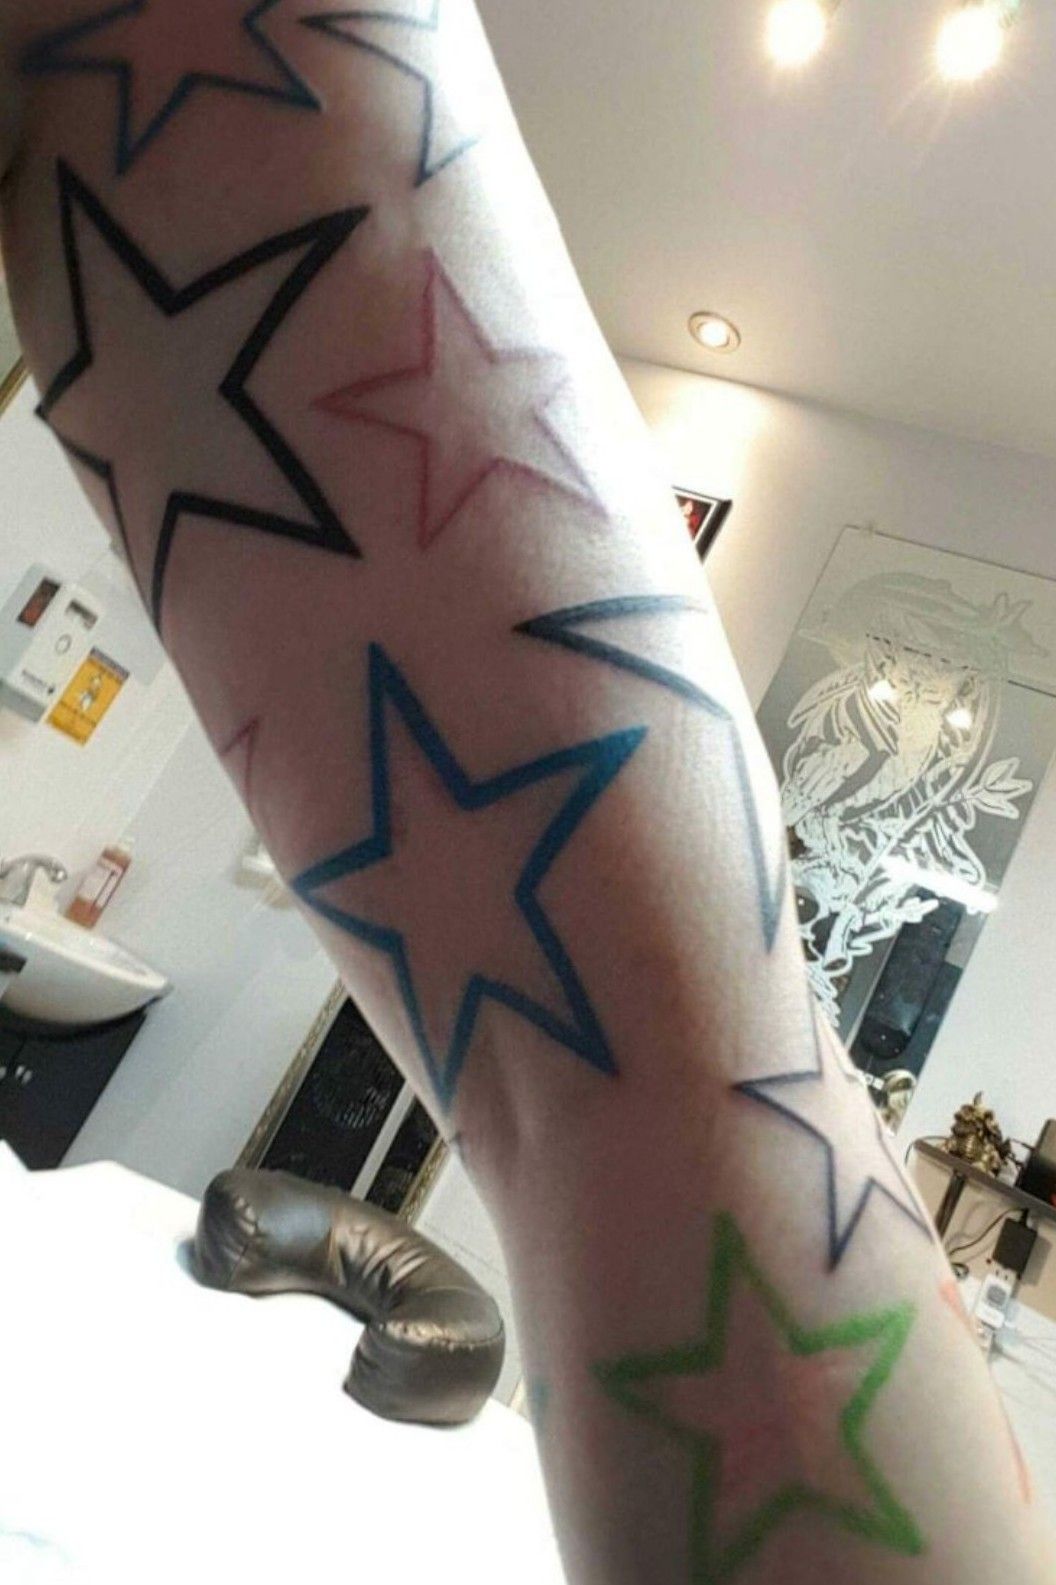 36 Clouds And Stars Tattoos With Meanings